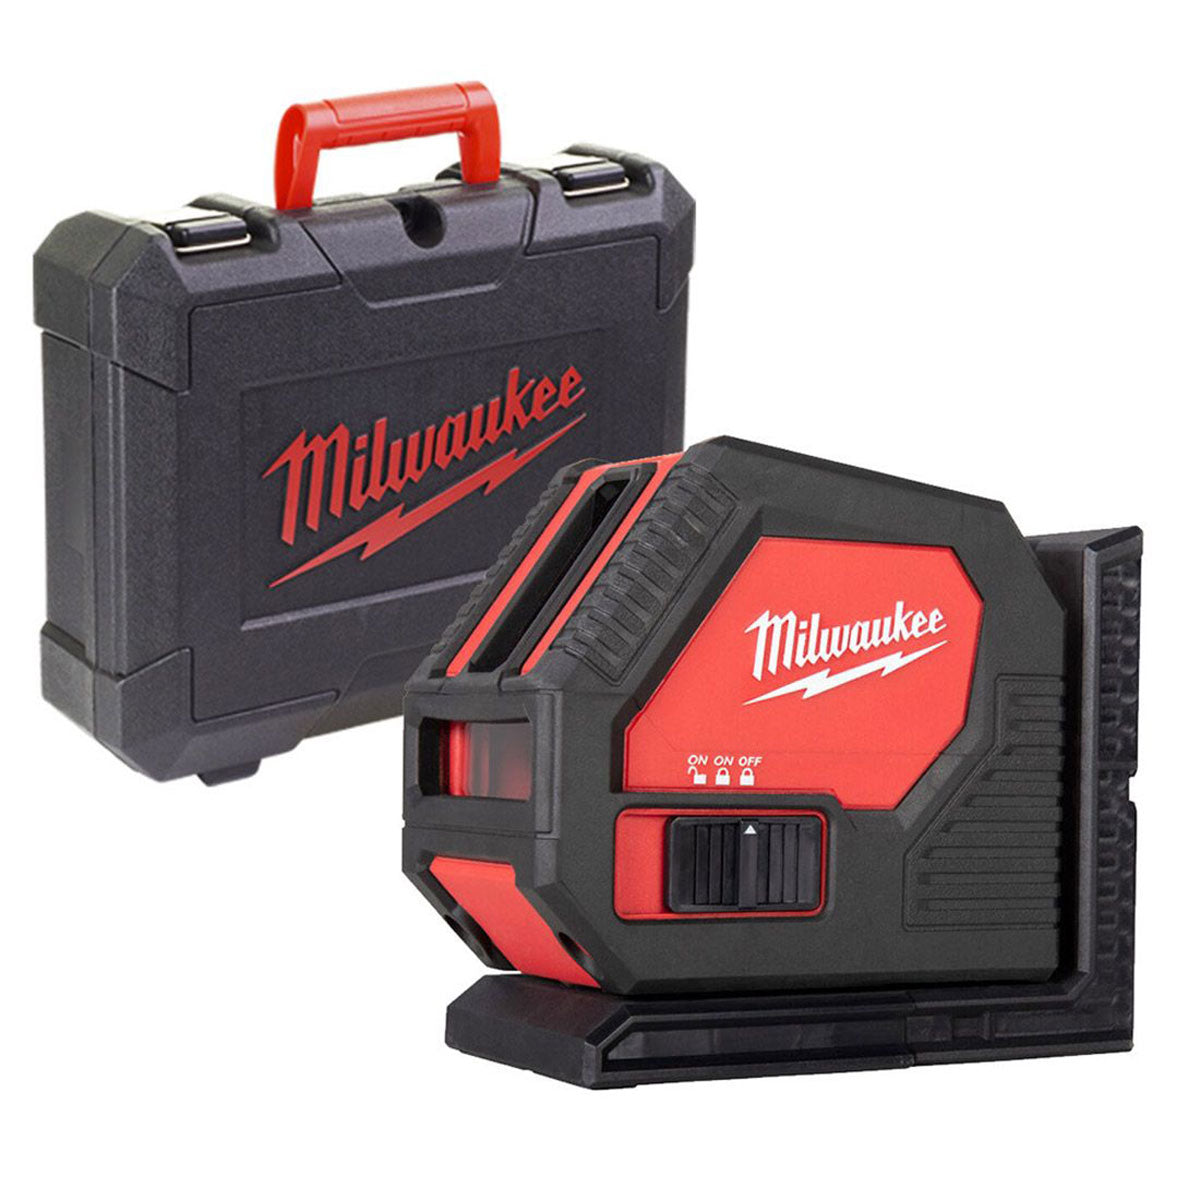 Milwaukee CLL-C Green Cross Line Laser With Case 4933478753